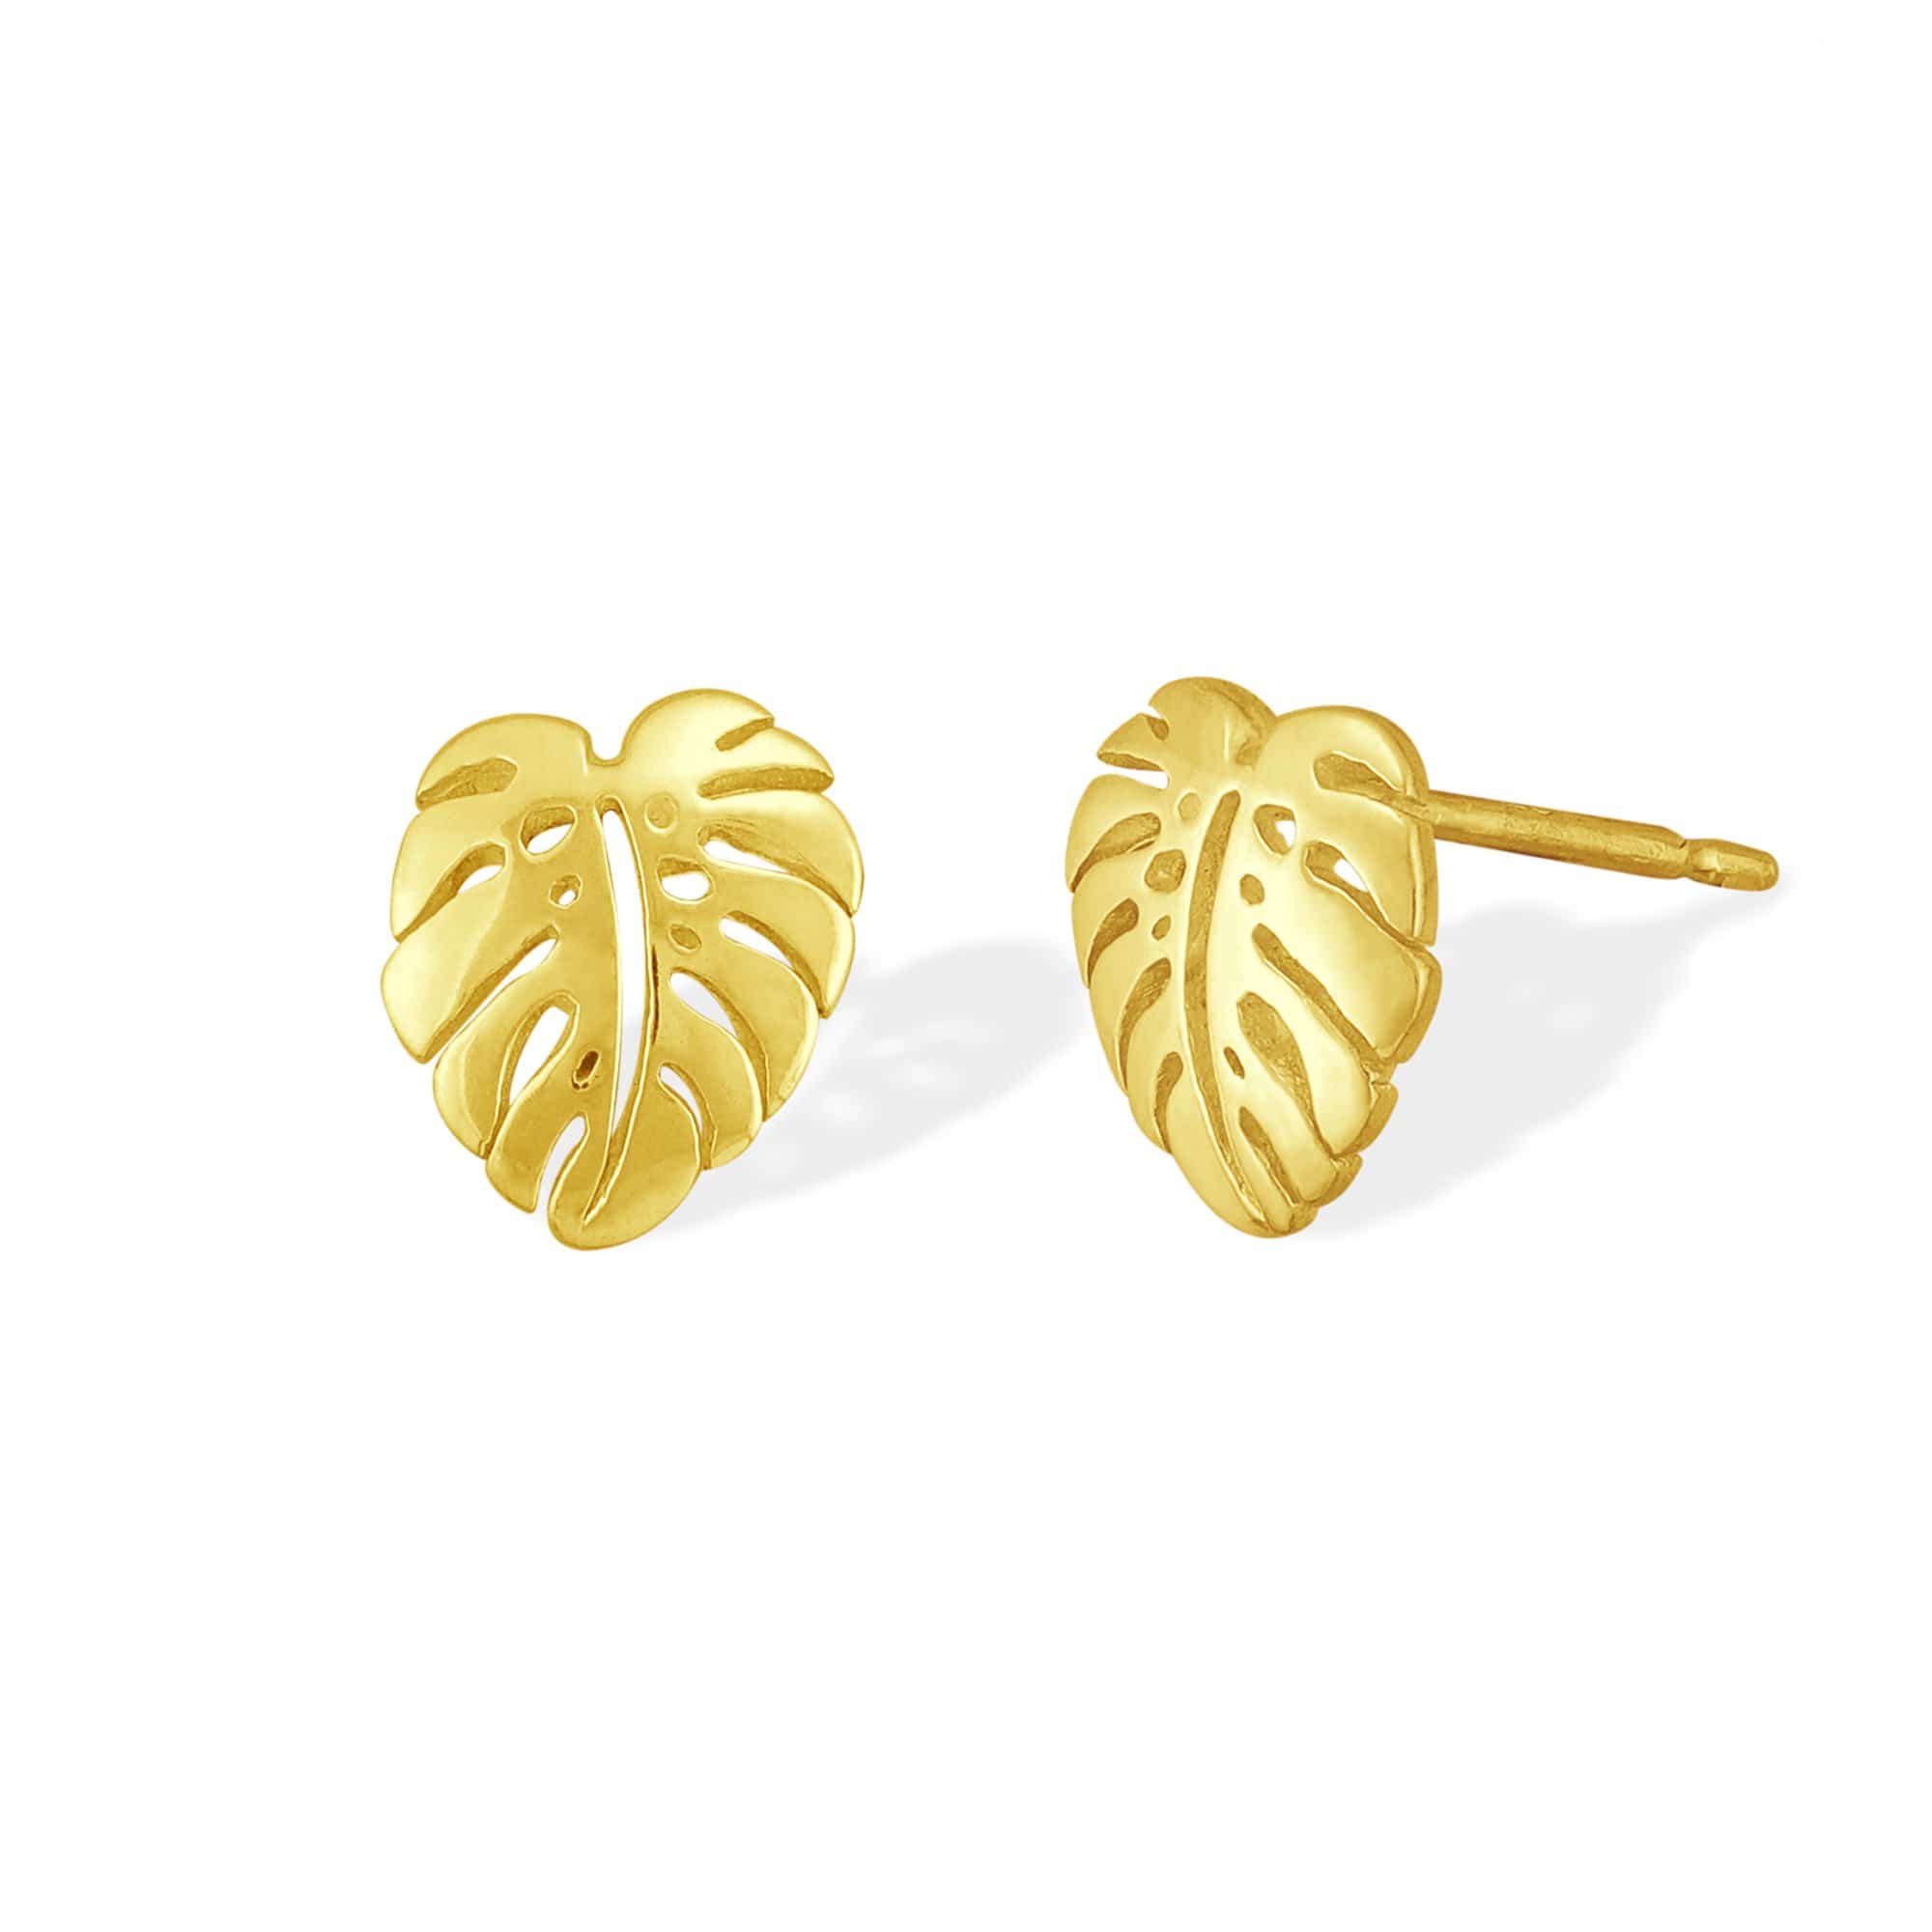 Boma Jewelry Earrings 14K Gold Plated Monstera Leaf Studs